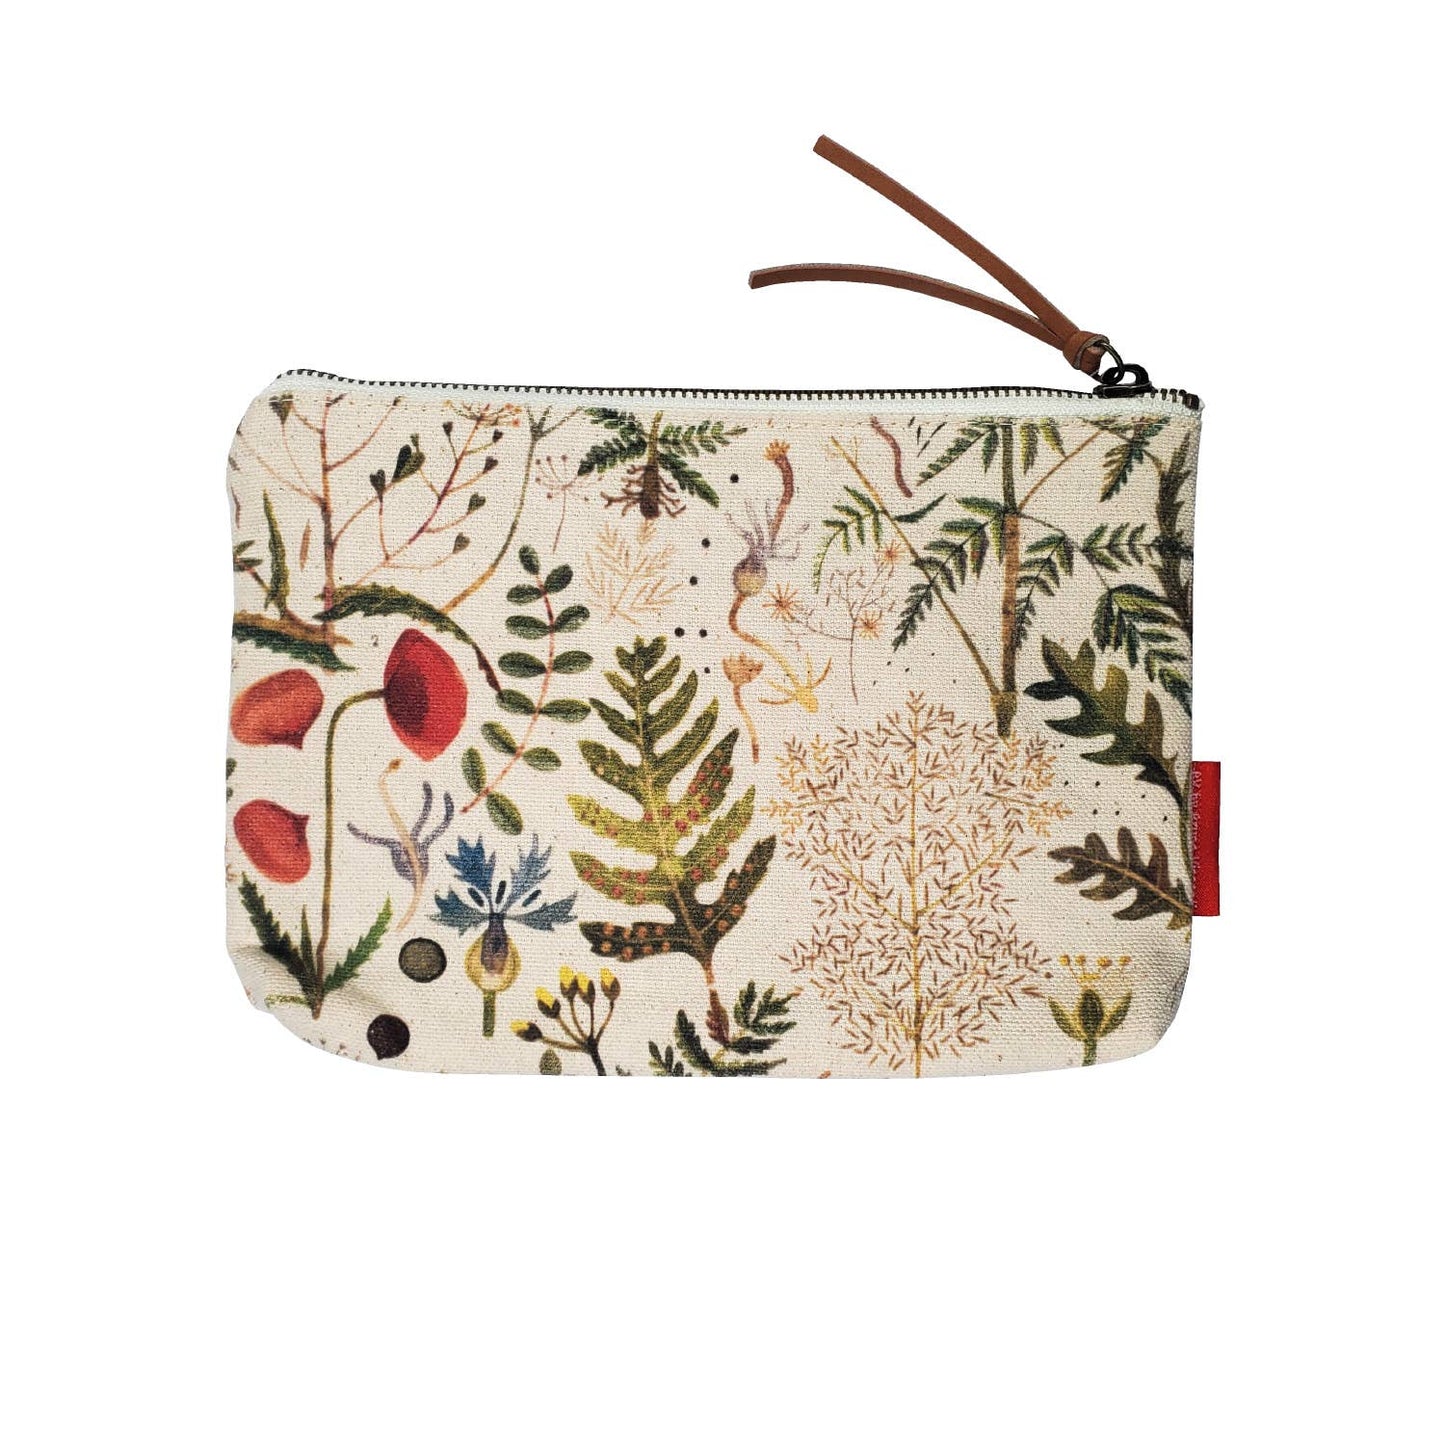 BV by Bruno Visconti - Pouch - Greens and Flowers